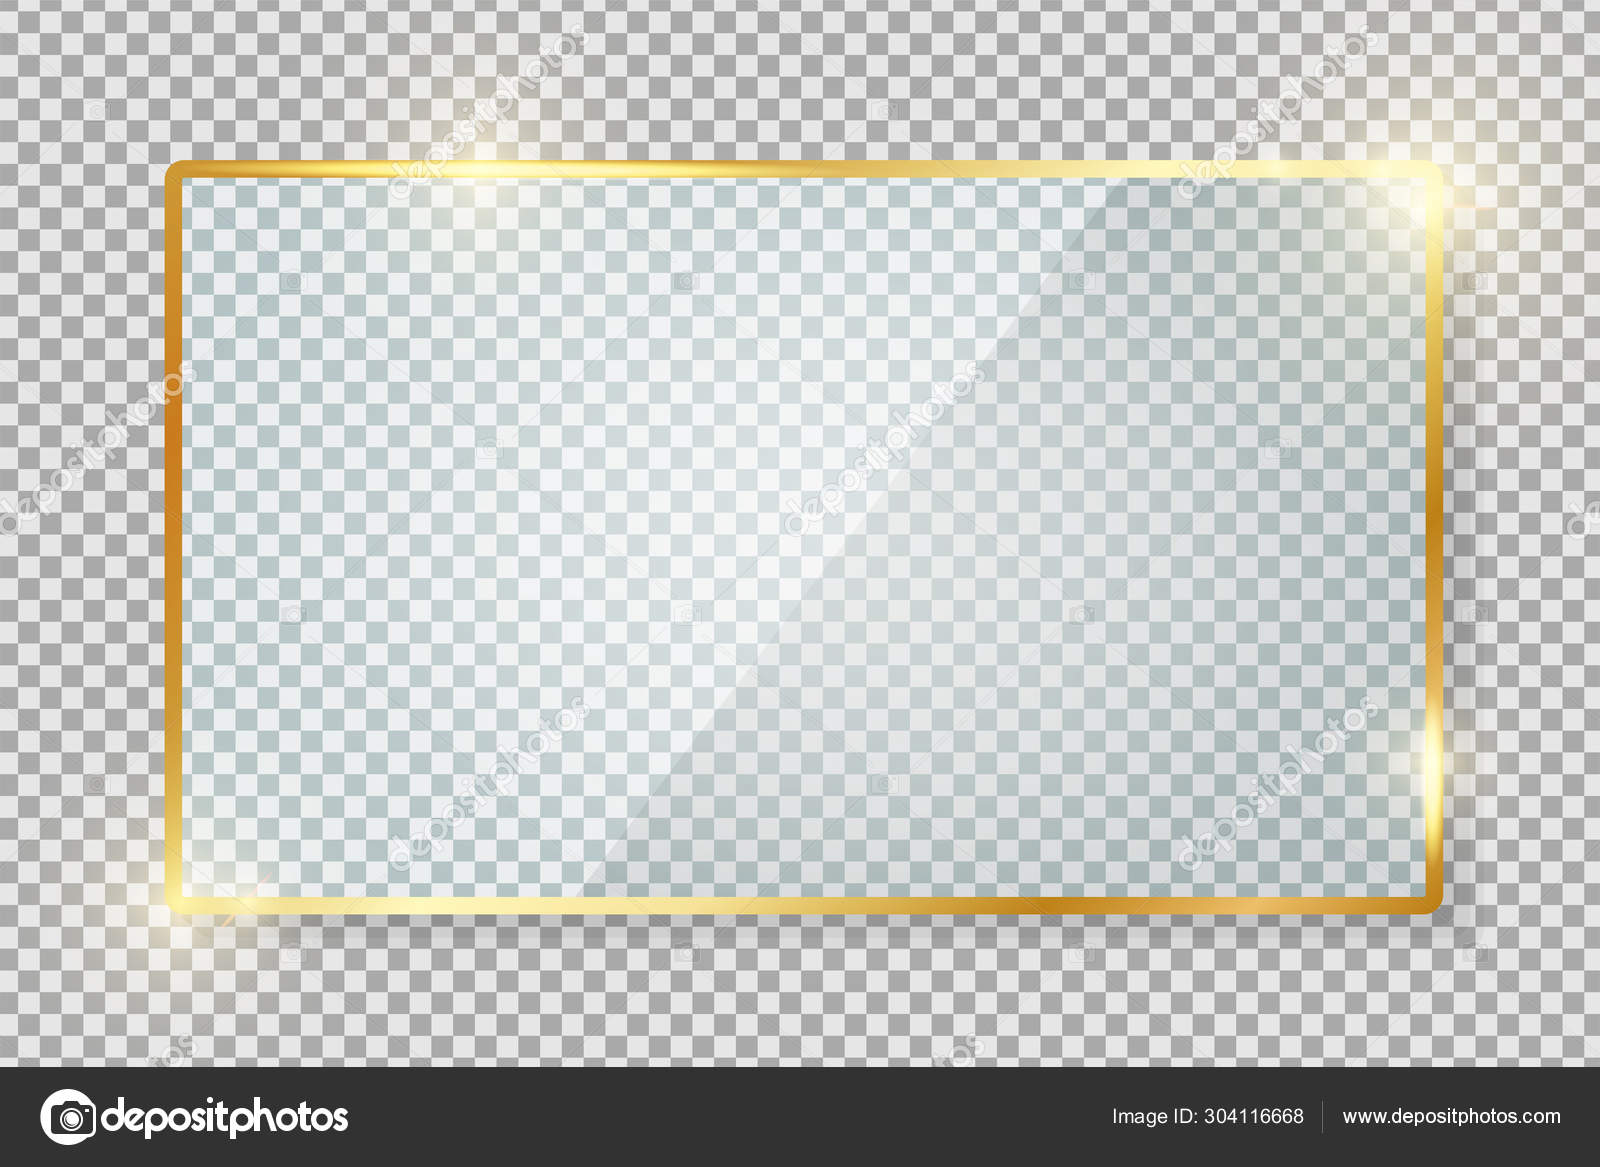 transparent-gold-glass-banner-with-reflection-isolated-on-transparent